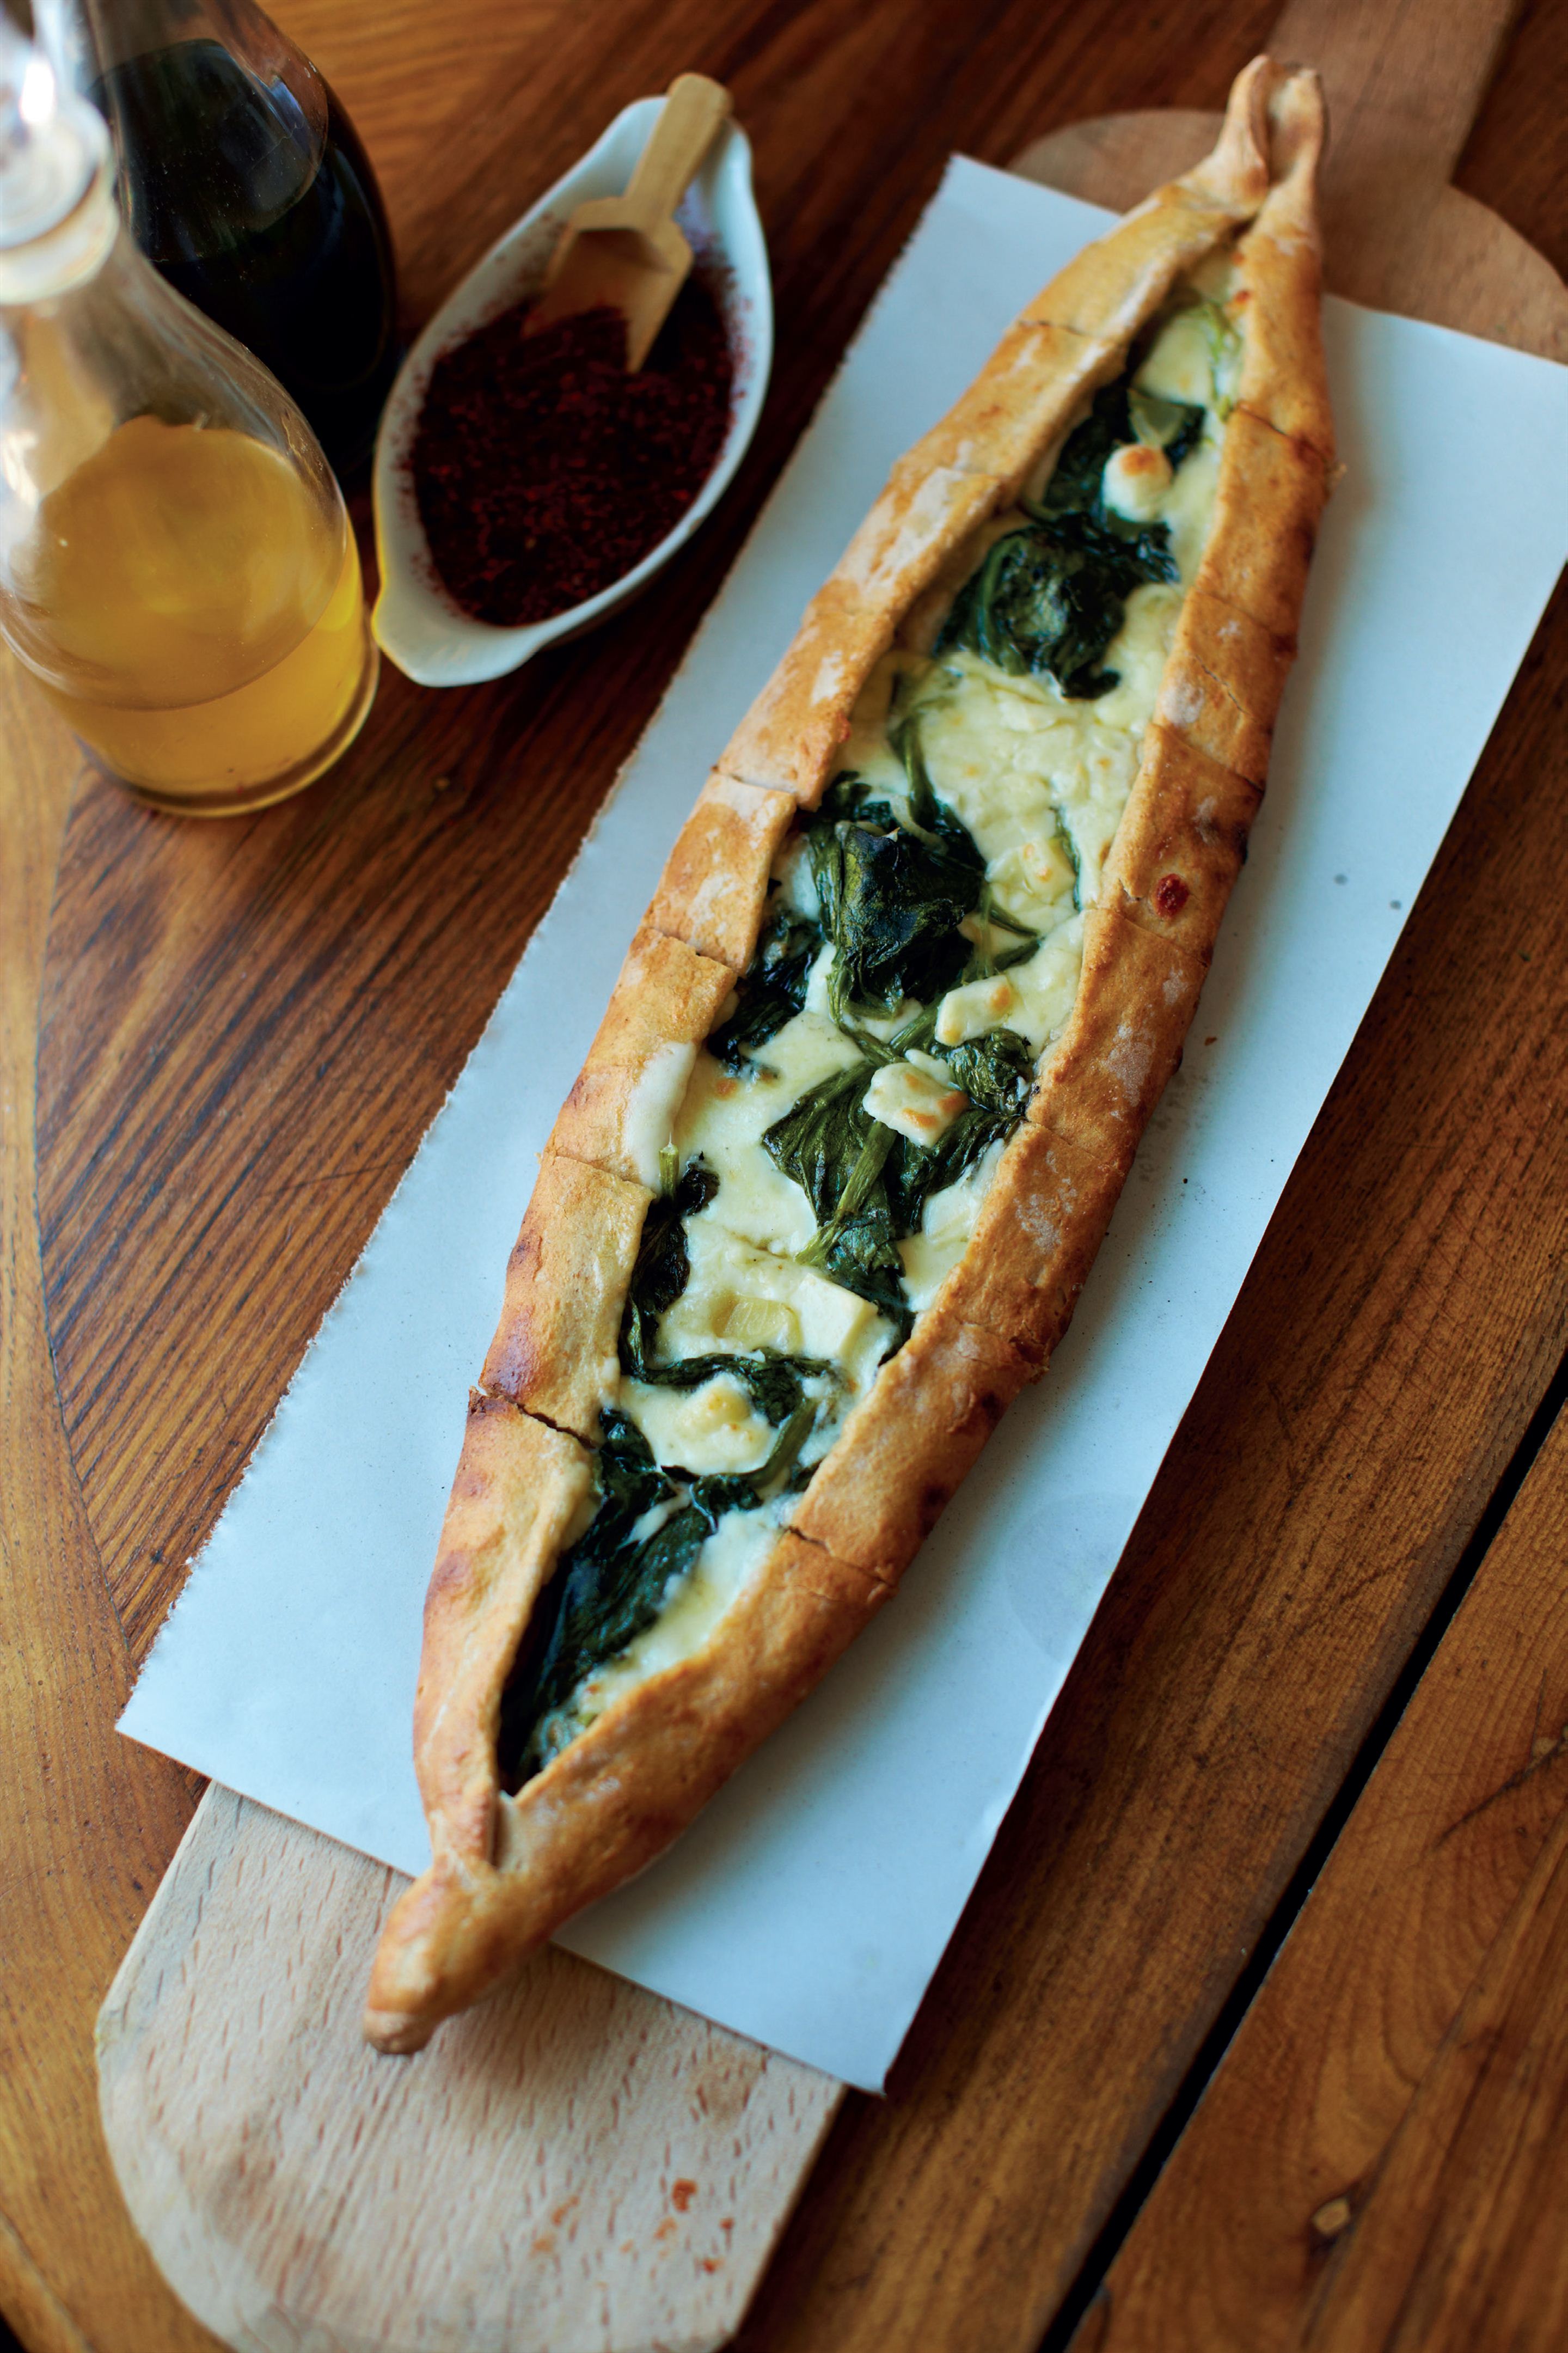 Cheese pide, and spinach and cheese pide